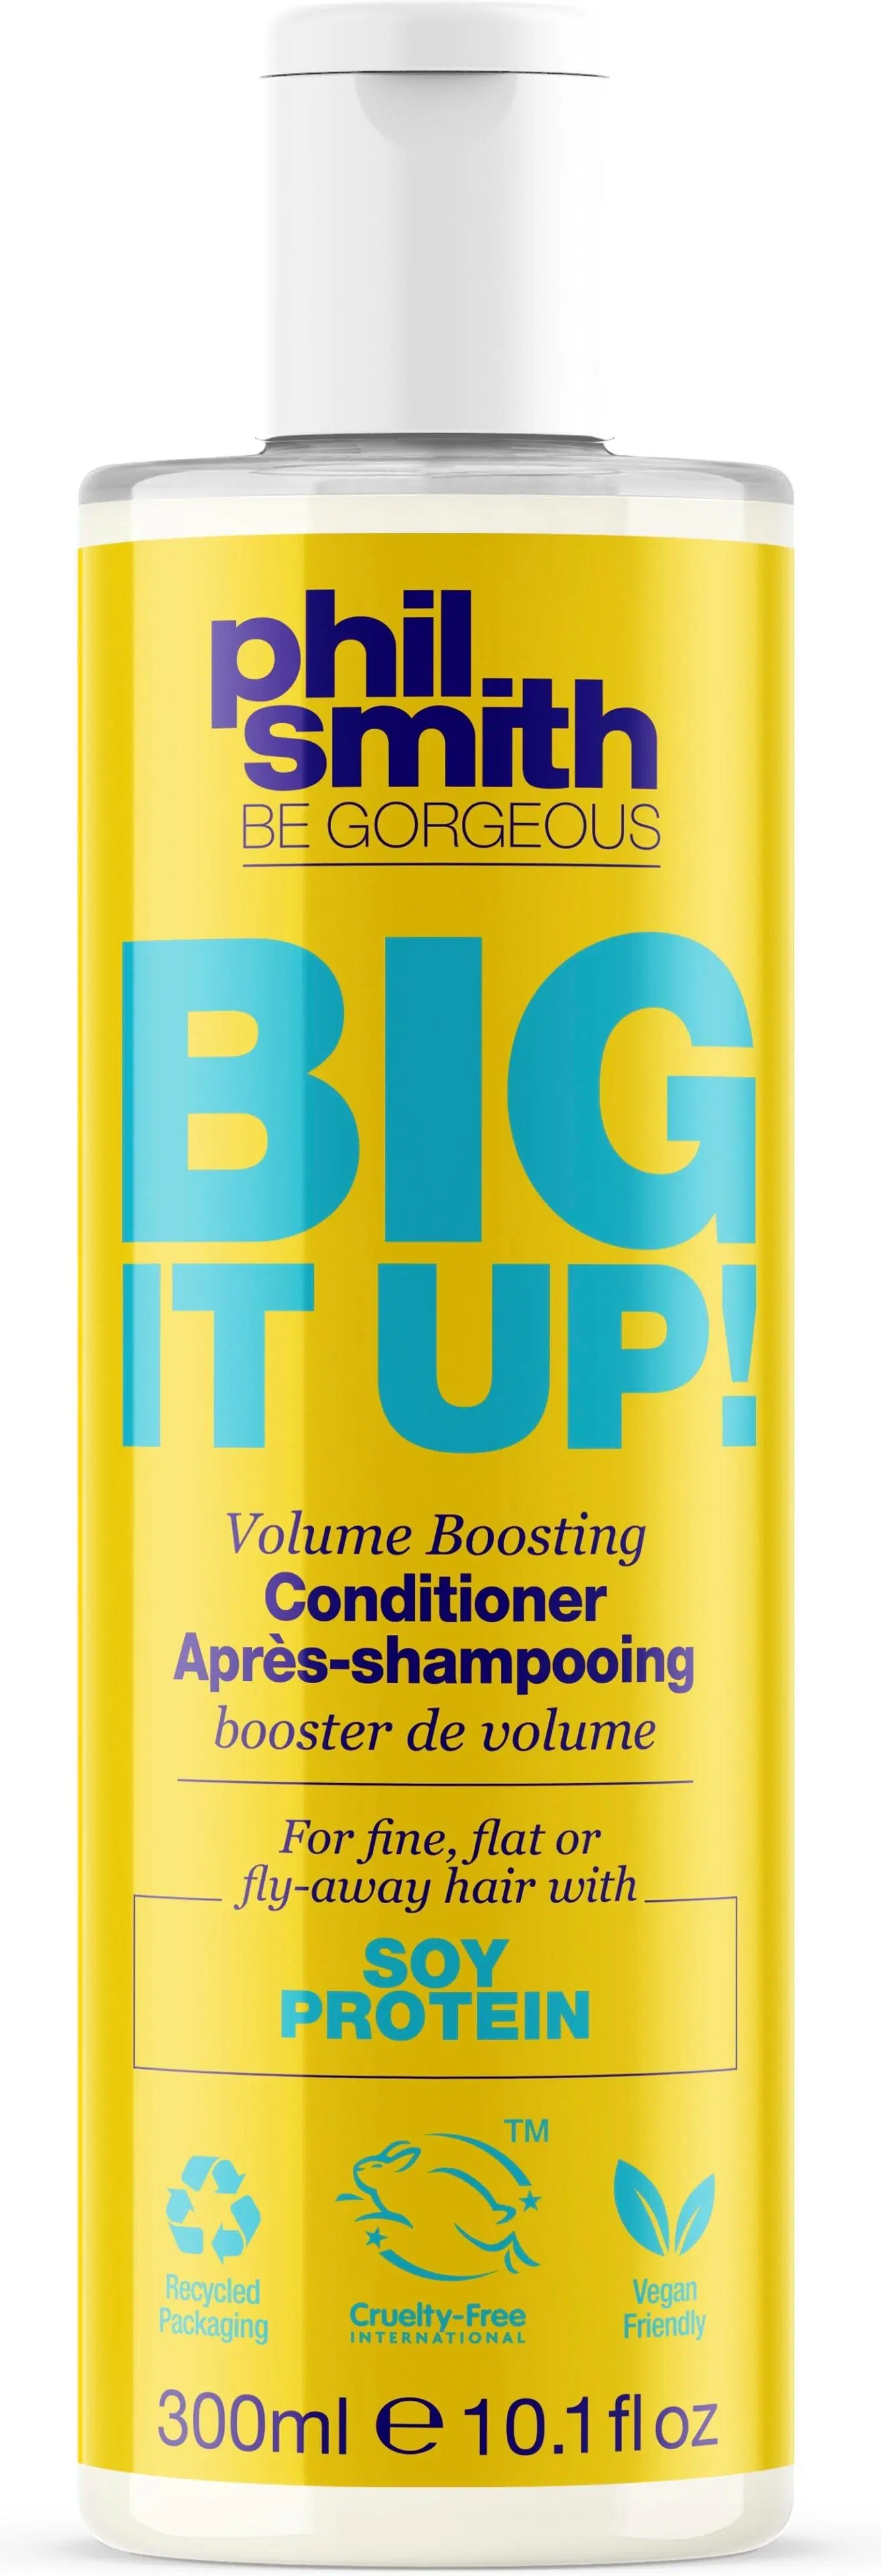 Phil Smith Be Gorgeous Big It Up! Volume Boosting Conditioner -hoitoaine 300ml